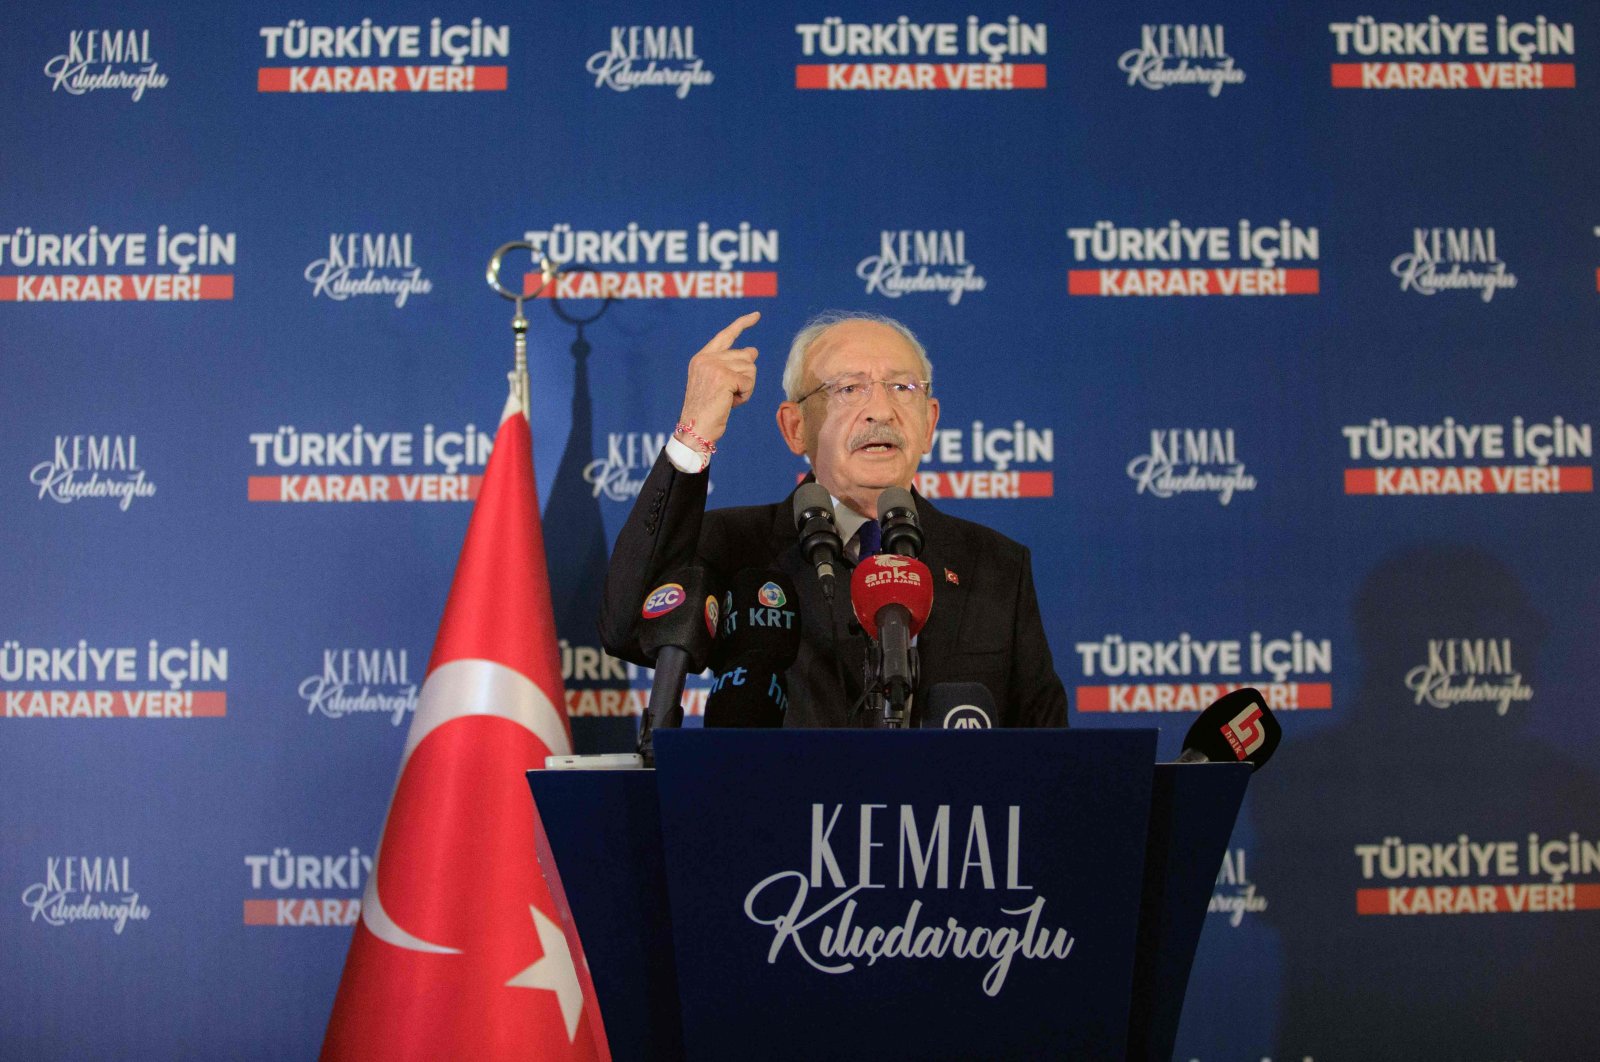 Kemal Kılıçdaroğlu, Republican People&#039;s Party (CHP) chairperson and presidential candidate, gives a speech during a campaign rally in Antakya, Türkiye, May 23, 2023. (AFP Photo)